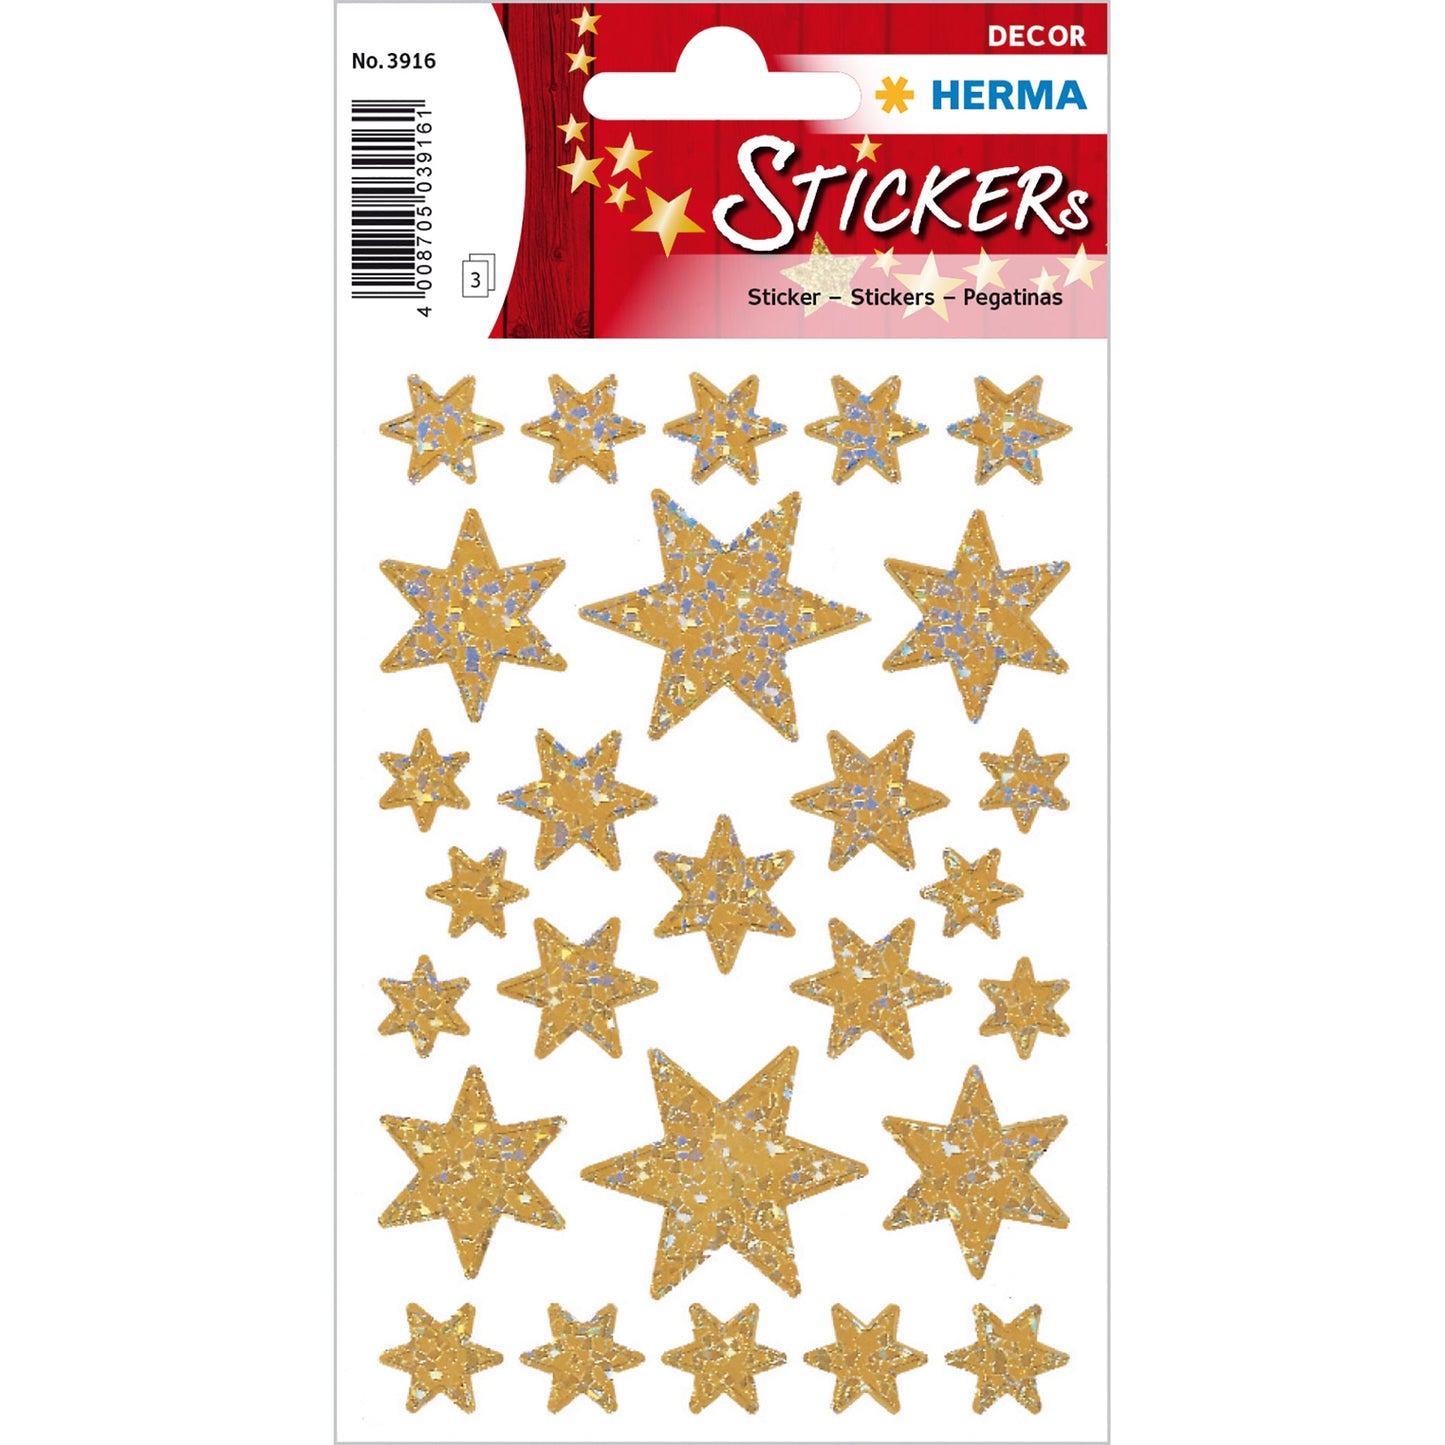 Stickers stars 6-pointed, Gold pearlized film (3916)